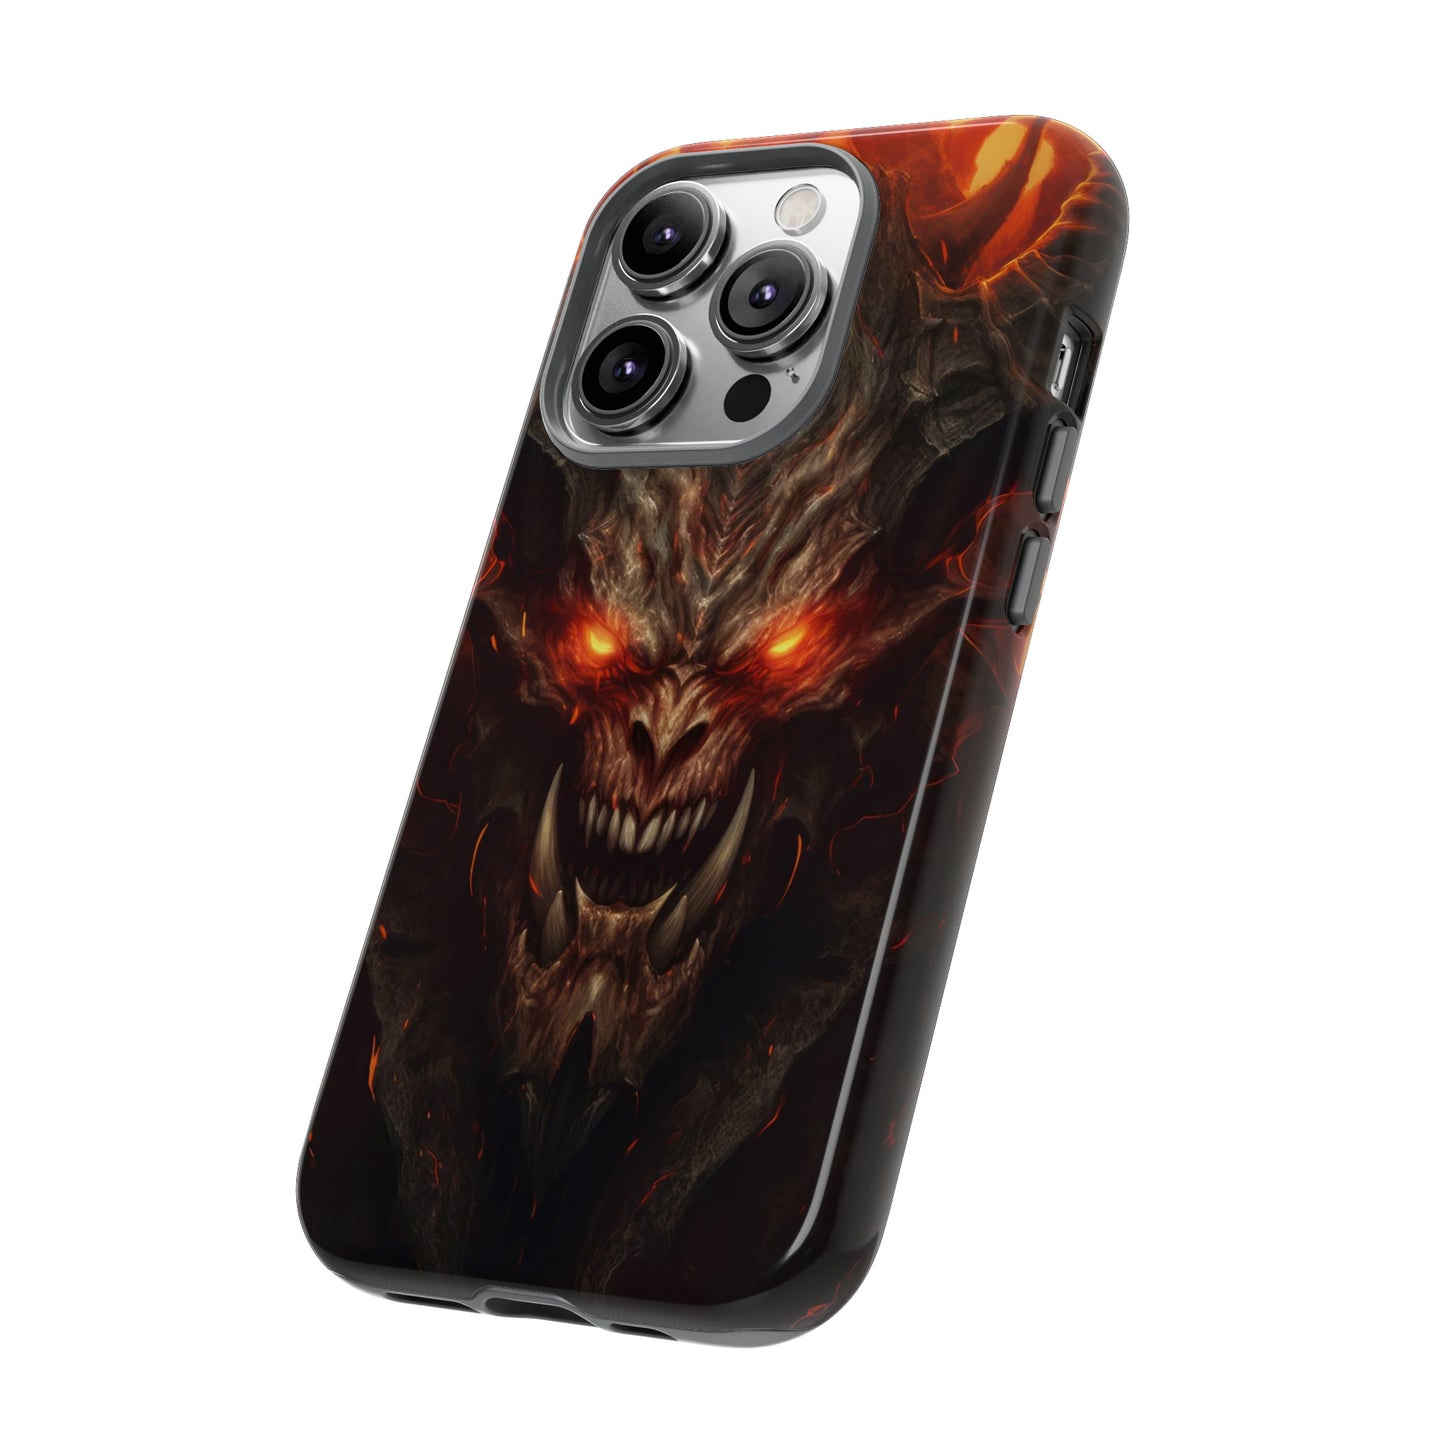 Inferno Dragon's Visage: Glowing Scales Phone Case for iPhone, Samsung, Pixel